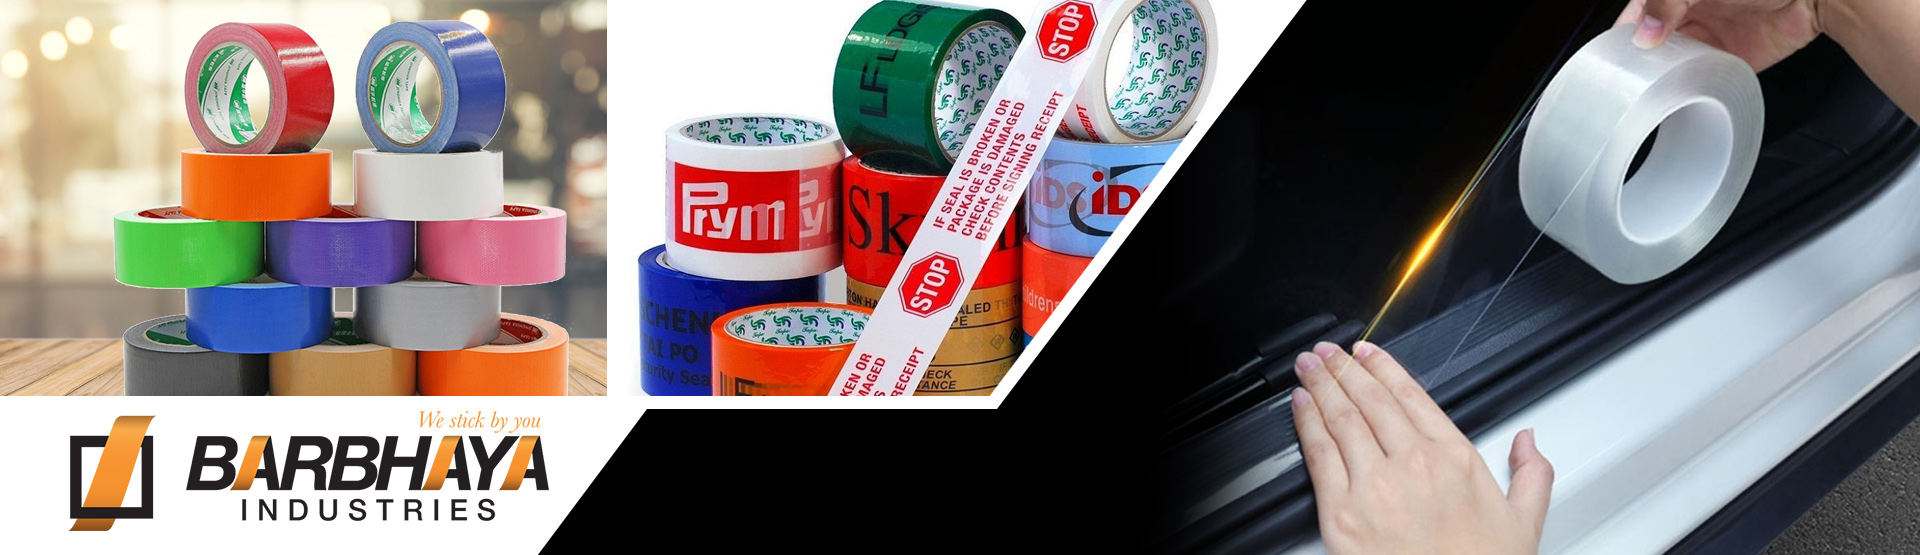 BARBHAYA INDUSTRIES - Manufacturers of Adhesives Tapes